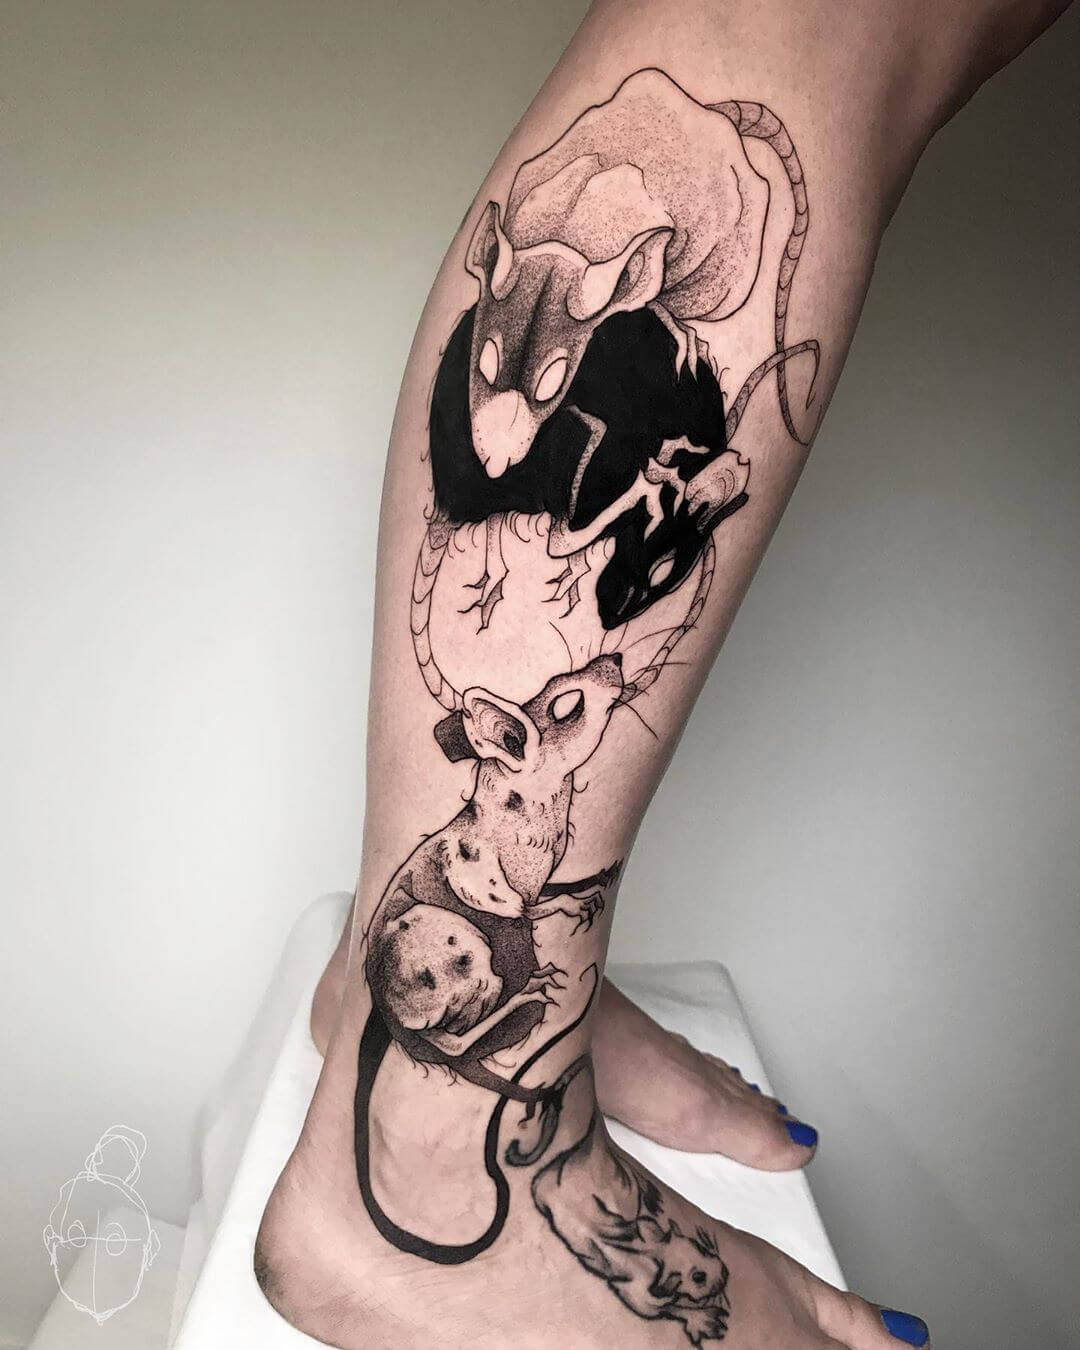 101 Amazing Rat Tattoo Designs You Need To See! | Outsons | Men's